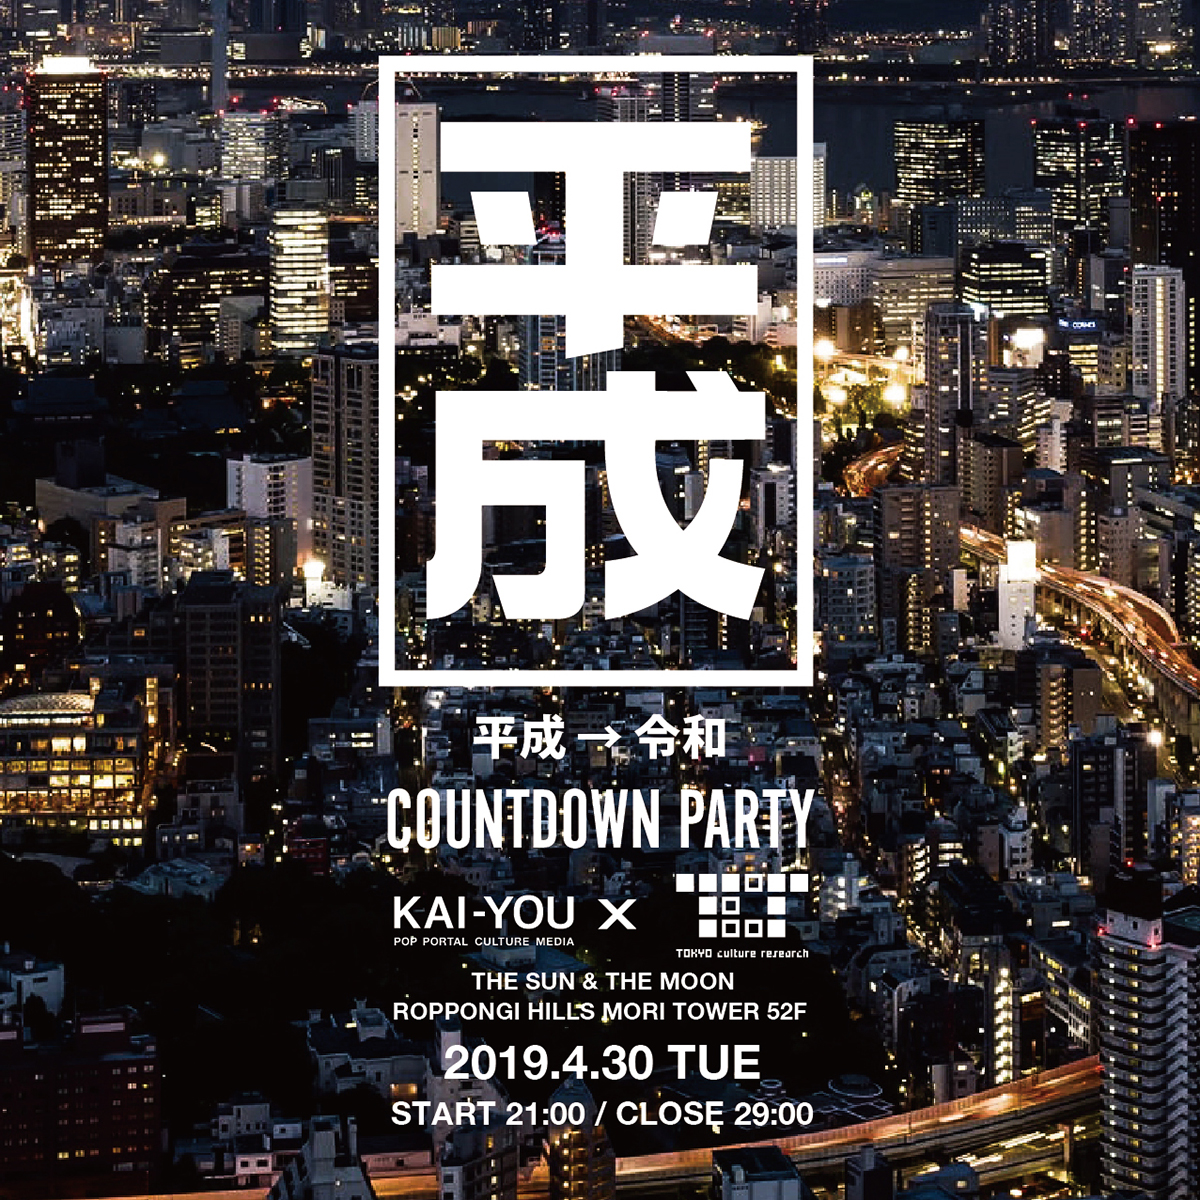 ʿ COUNTDOWN PARTY presented by KAI-YOUTOKYO culture research